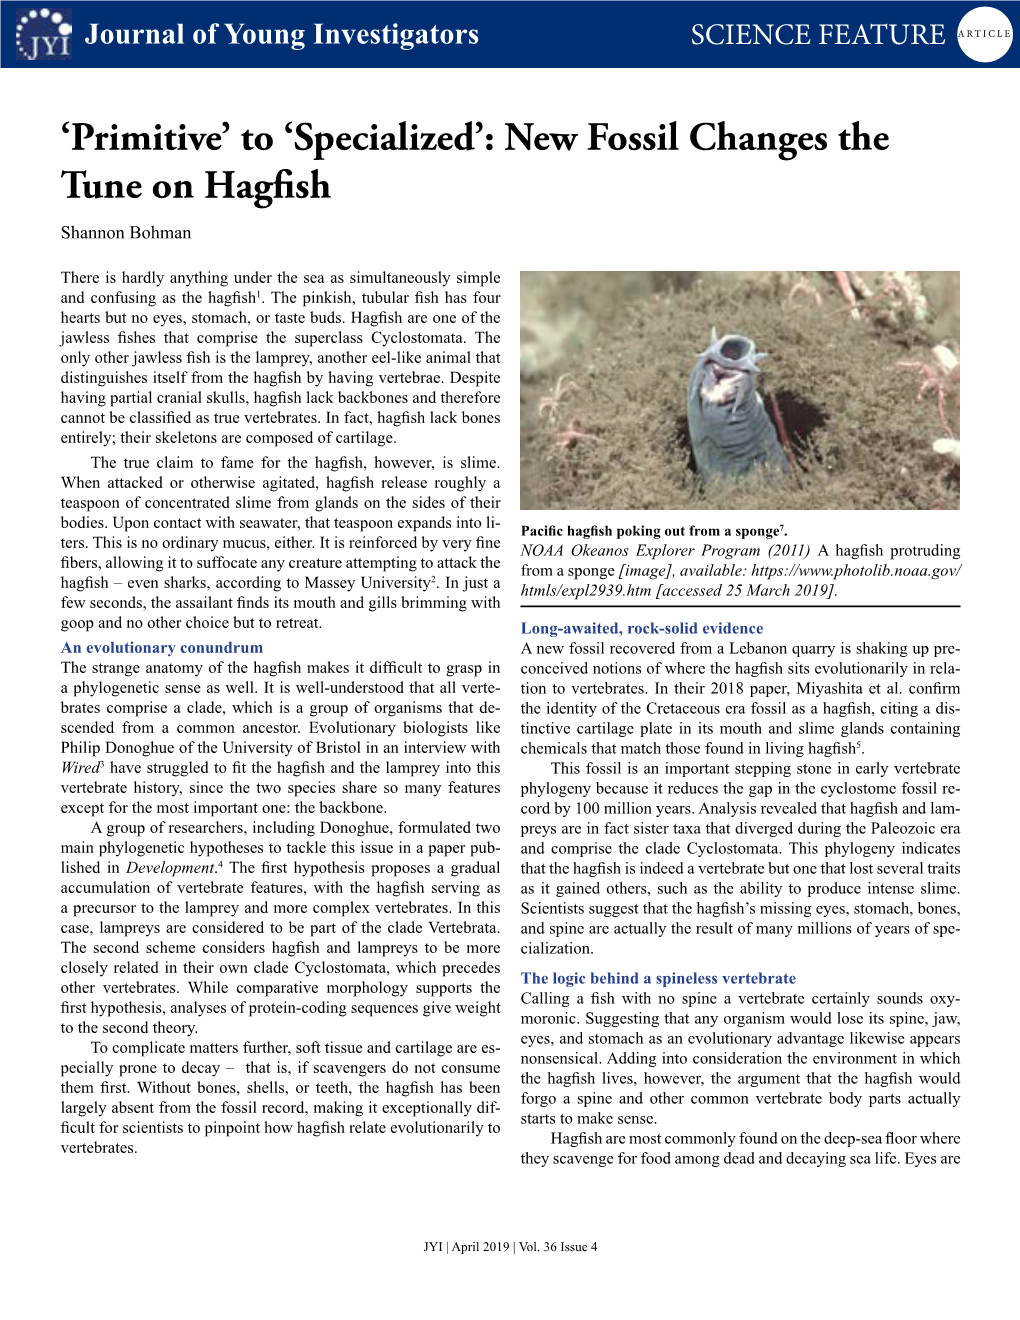 New Fossil Changes the Tune on Hagfish Shannon Bohman